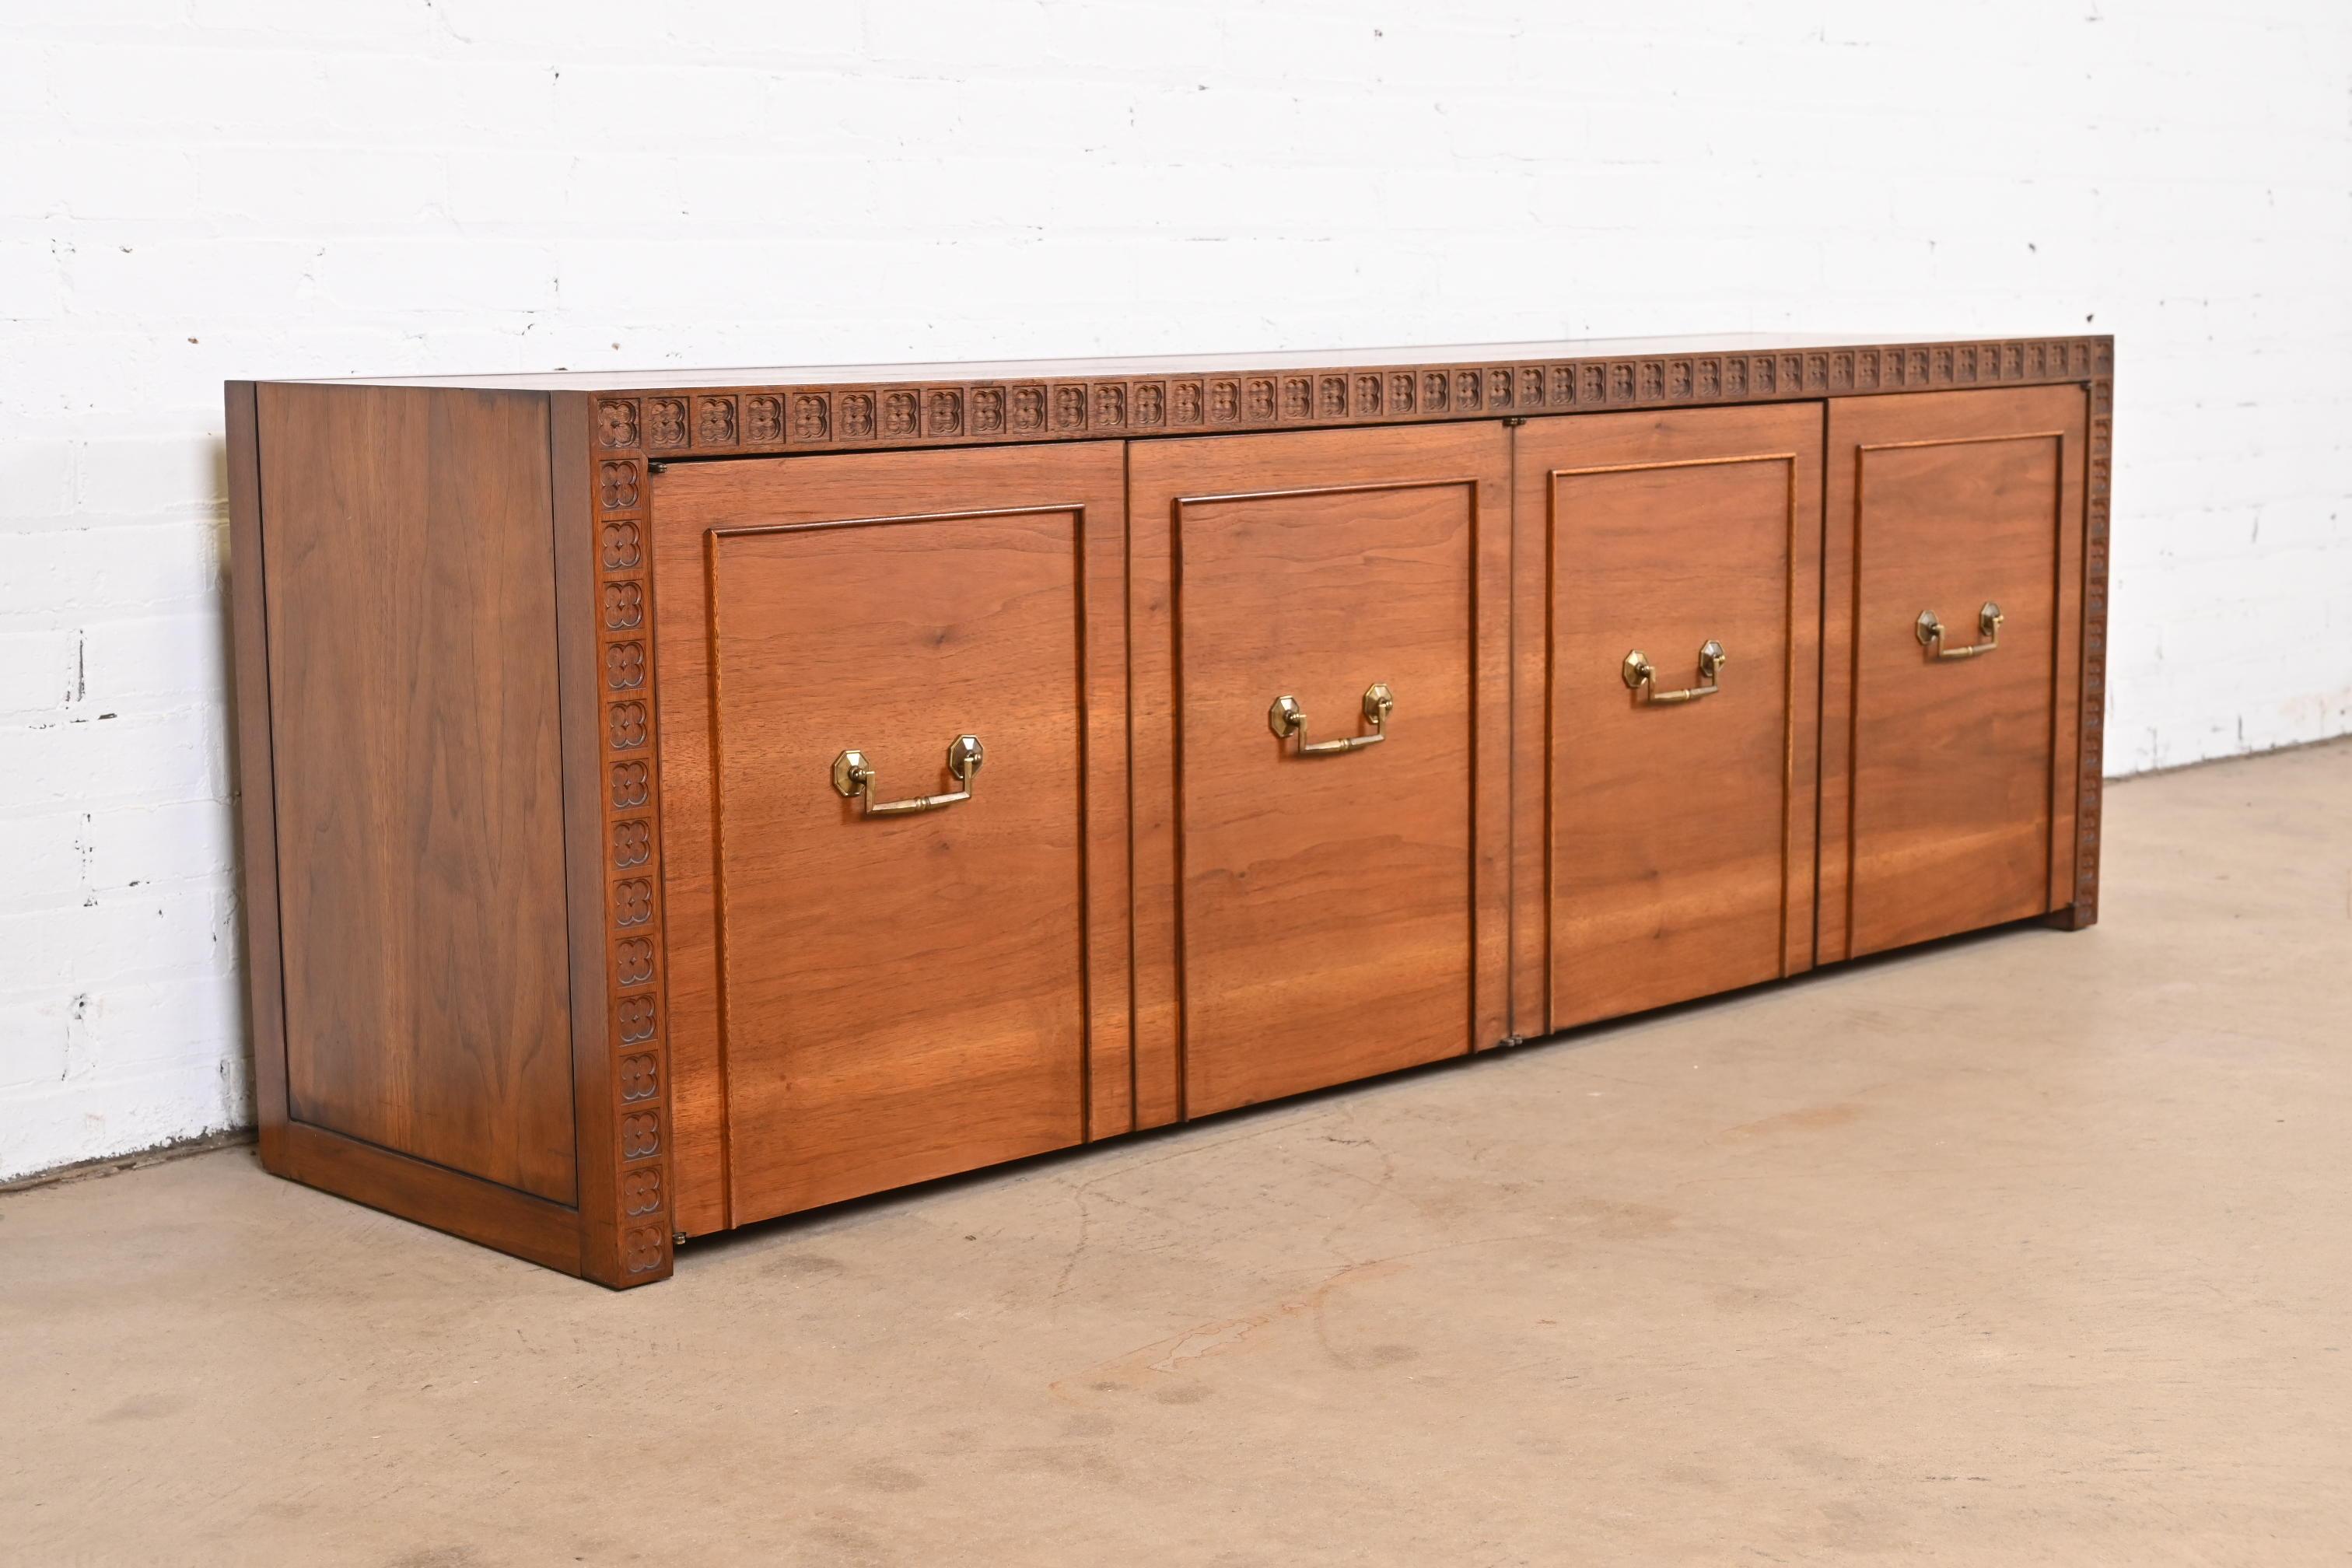 A beautiful Mid-Century Modern carved walnut low credenza or bench with storage cabinet

In the style of Frank Lloyd Wright

By Marden Furniture of Chicago

USA, 1960s

Measures: 69.13